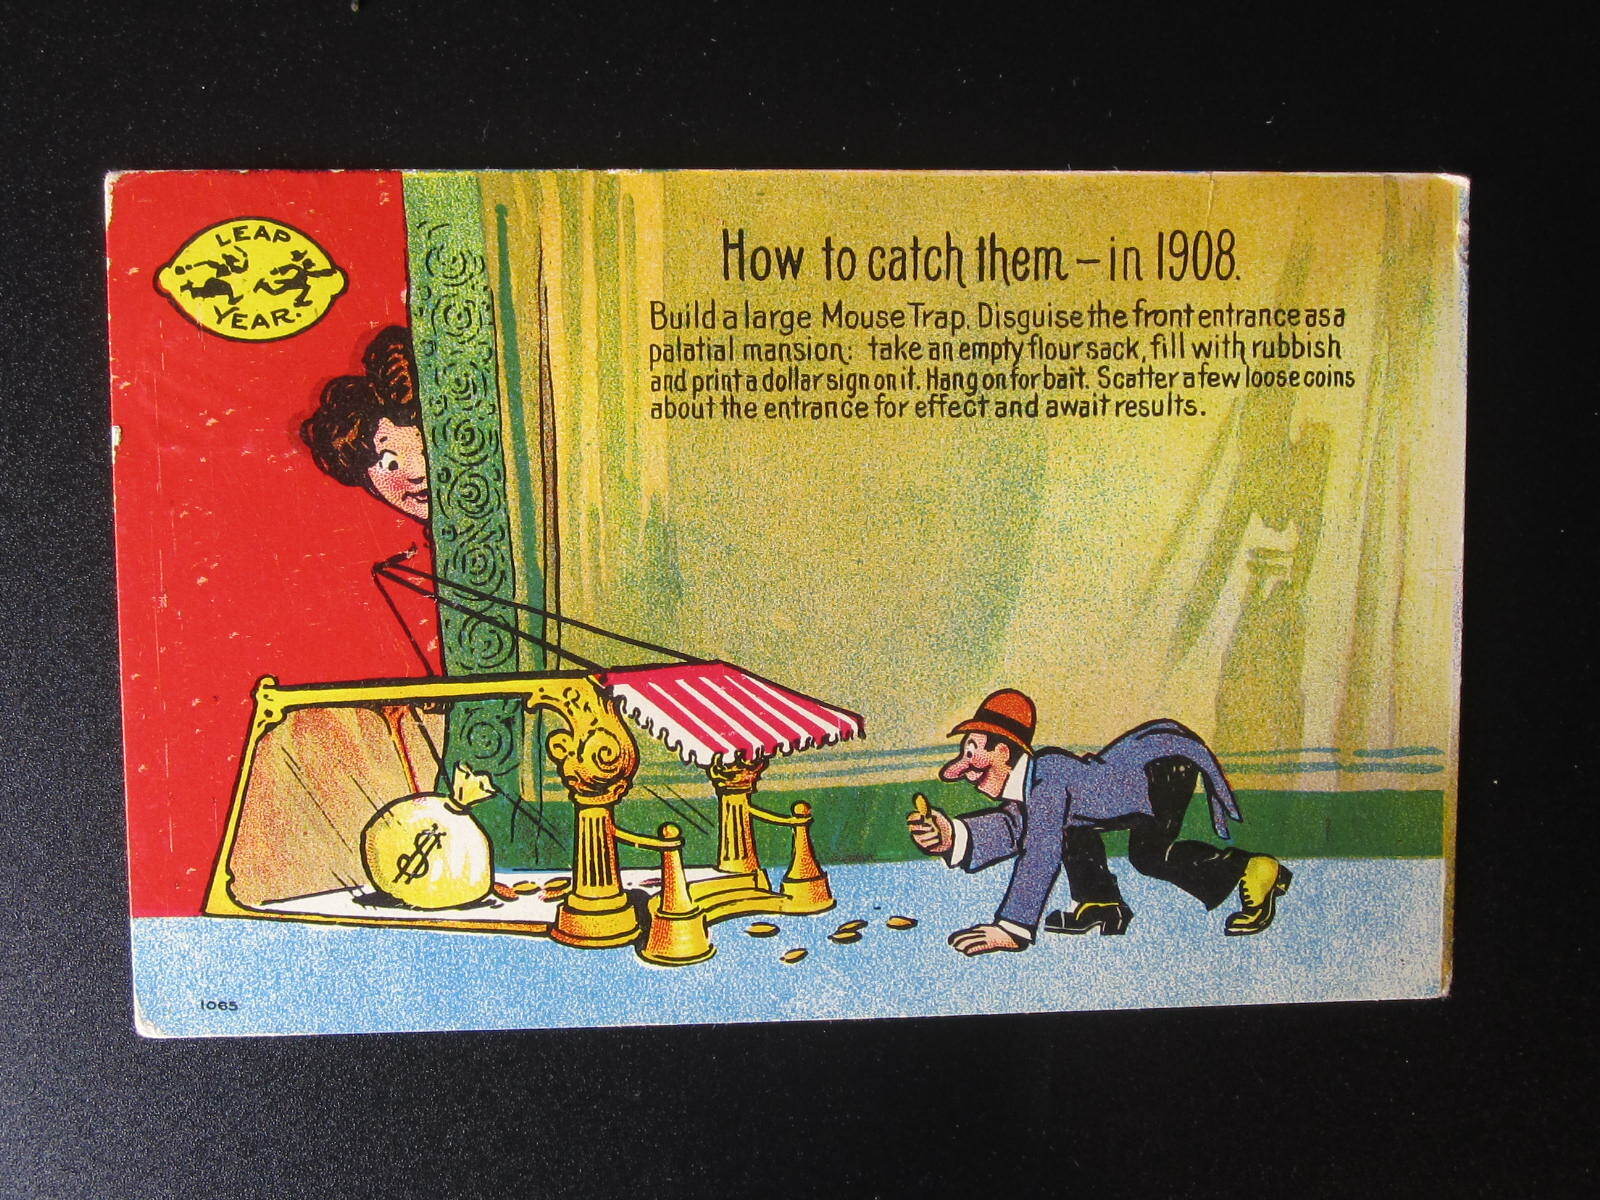 1908 Leap Year Post Card How to catch rats. Vintage Pristine Post Card